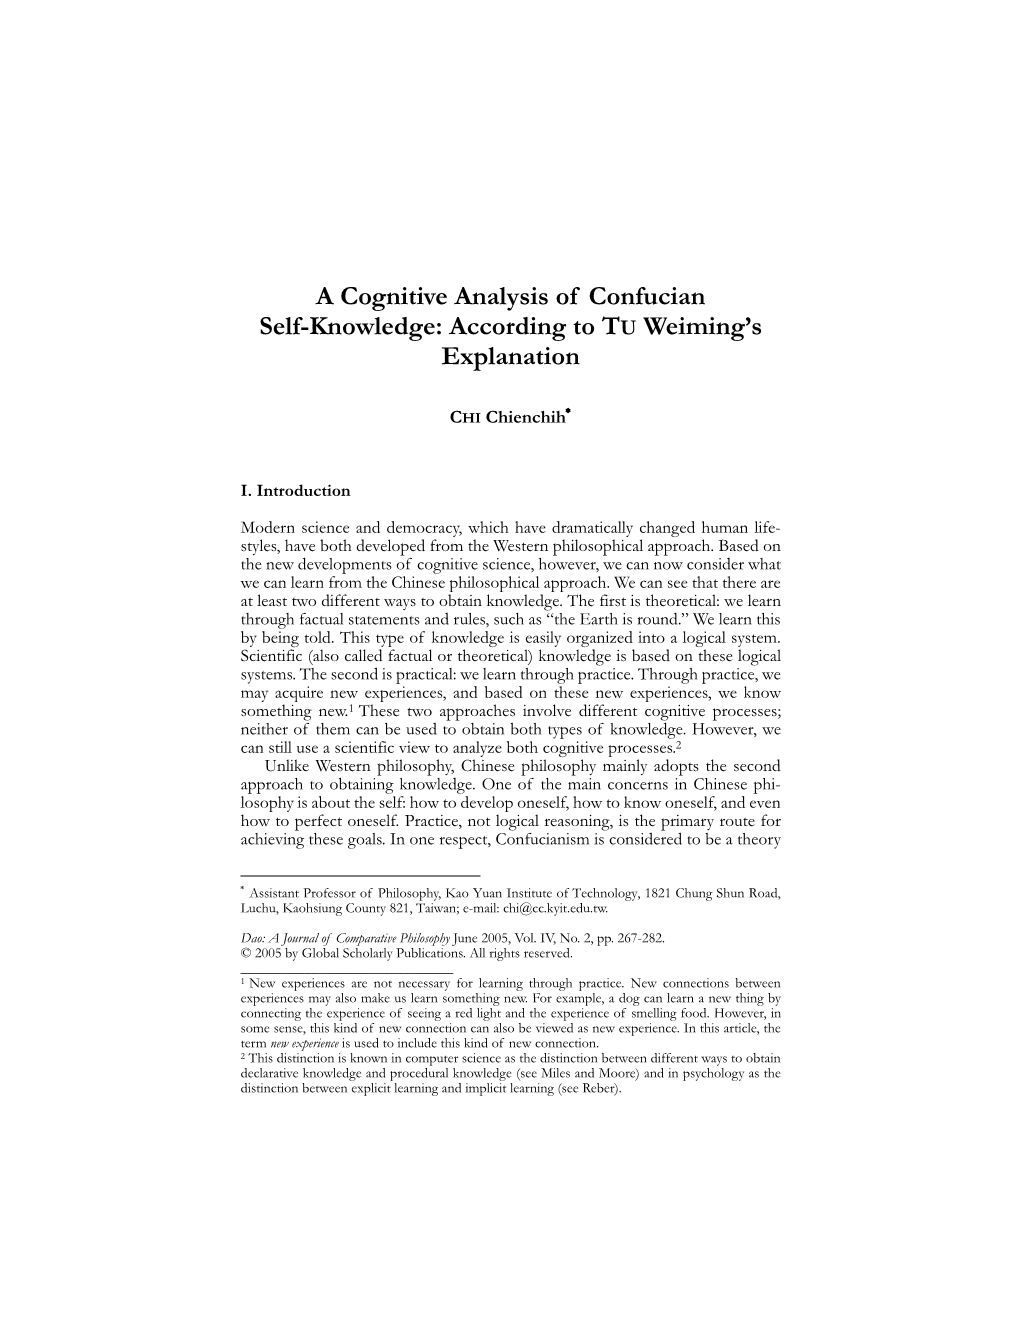 A Cognitive Analysis of Confucian Self-Knowledge: According to TU Weiming’S Explanation